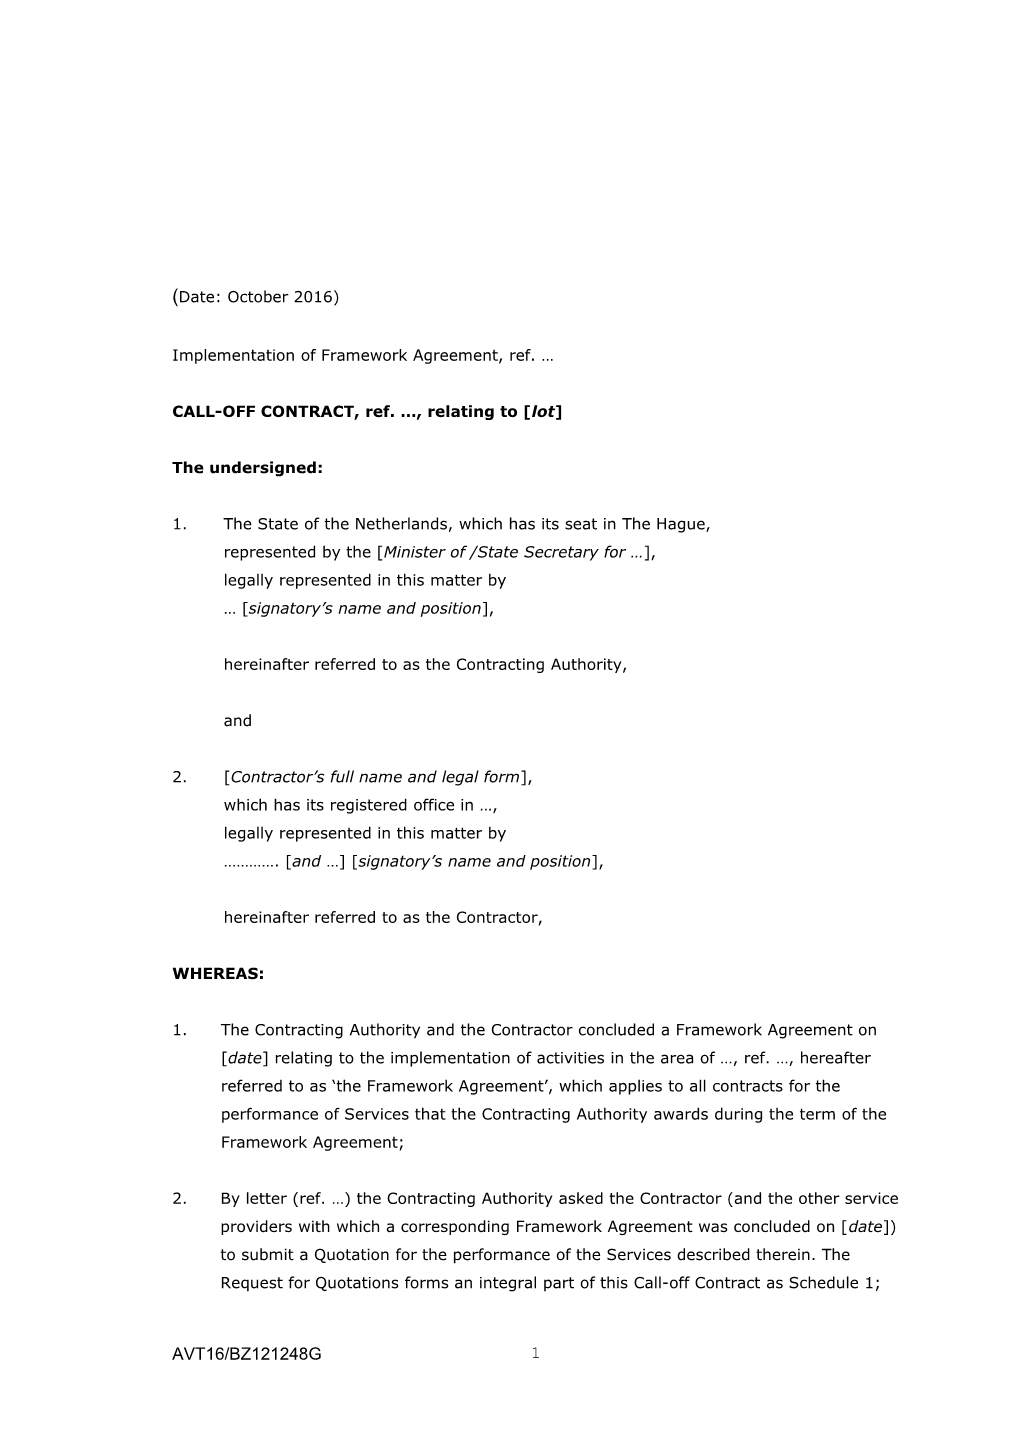 CALL-OFF CONTRACT, Ref. , Relating to Lot